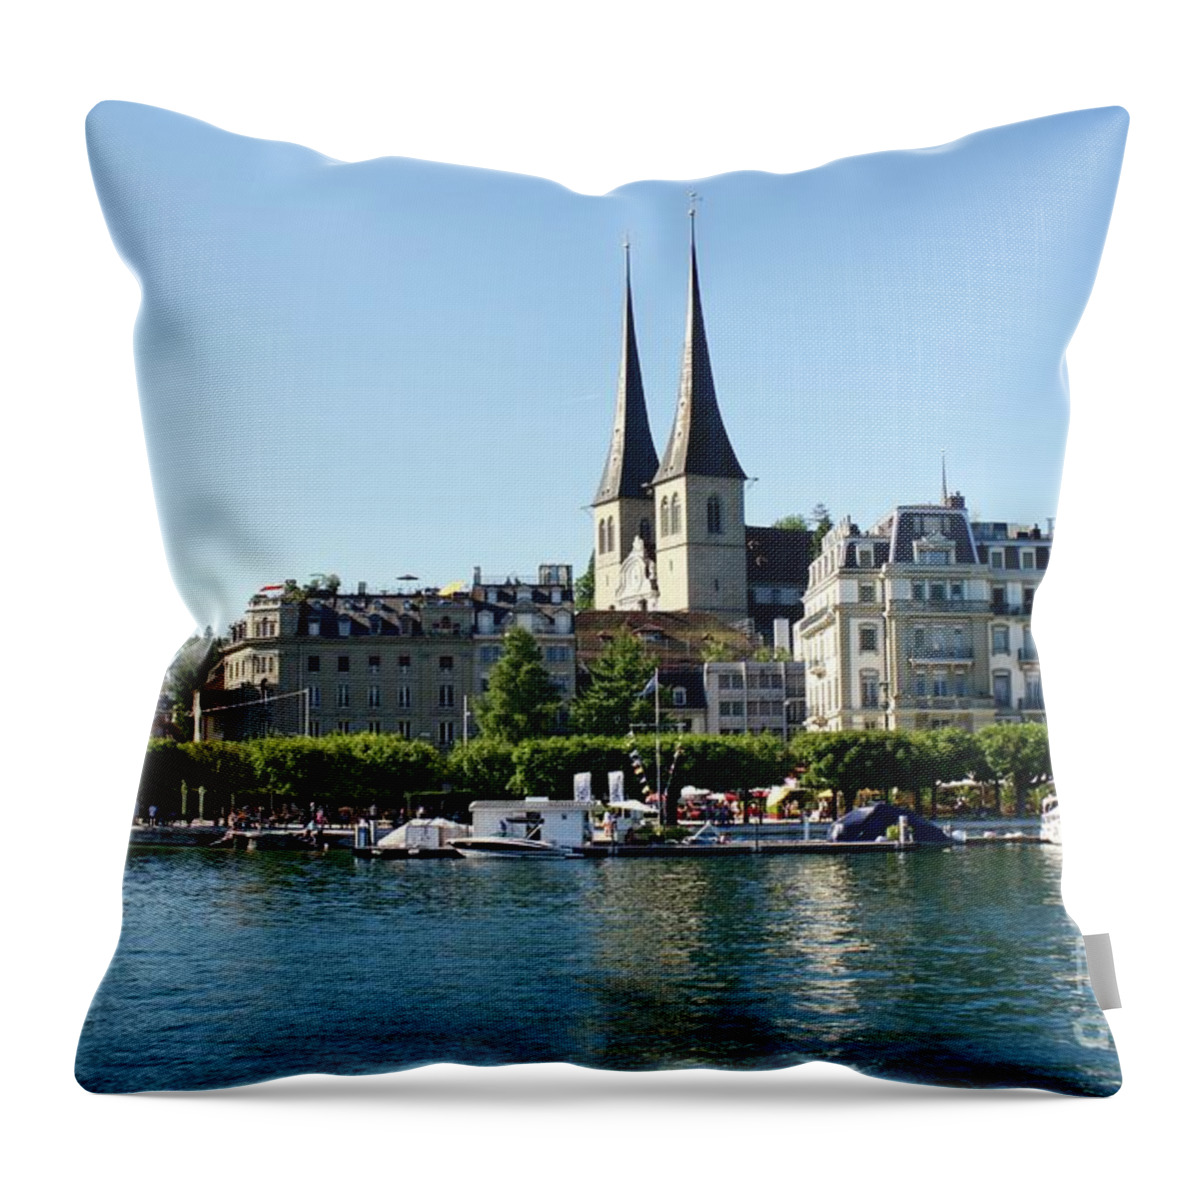 Luzern Throw Pillow featuring the photograph Luzern by Flavia Westerwelle